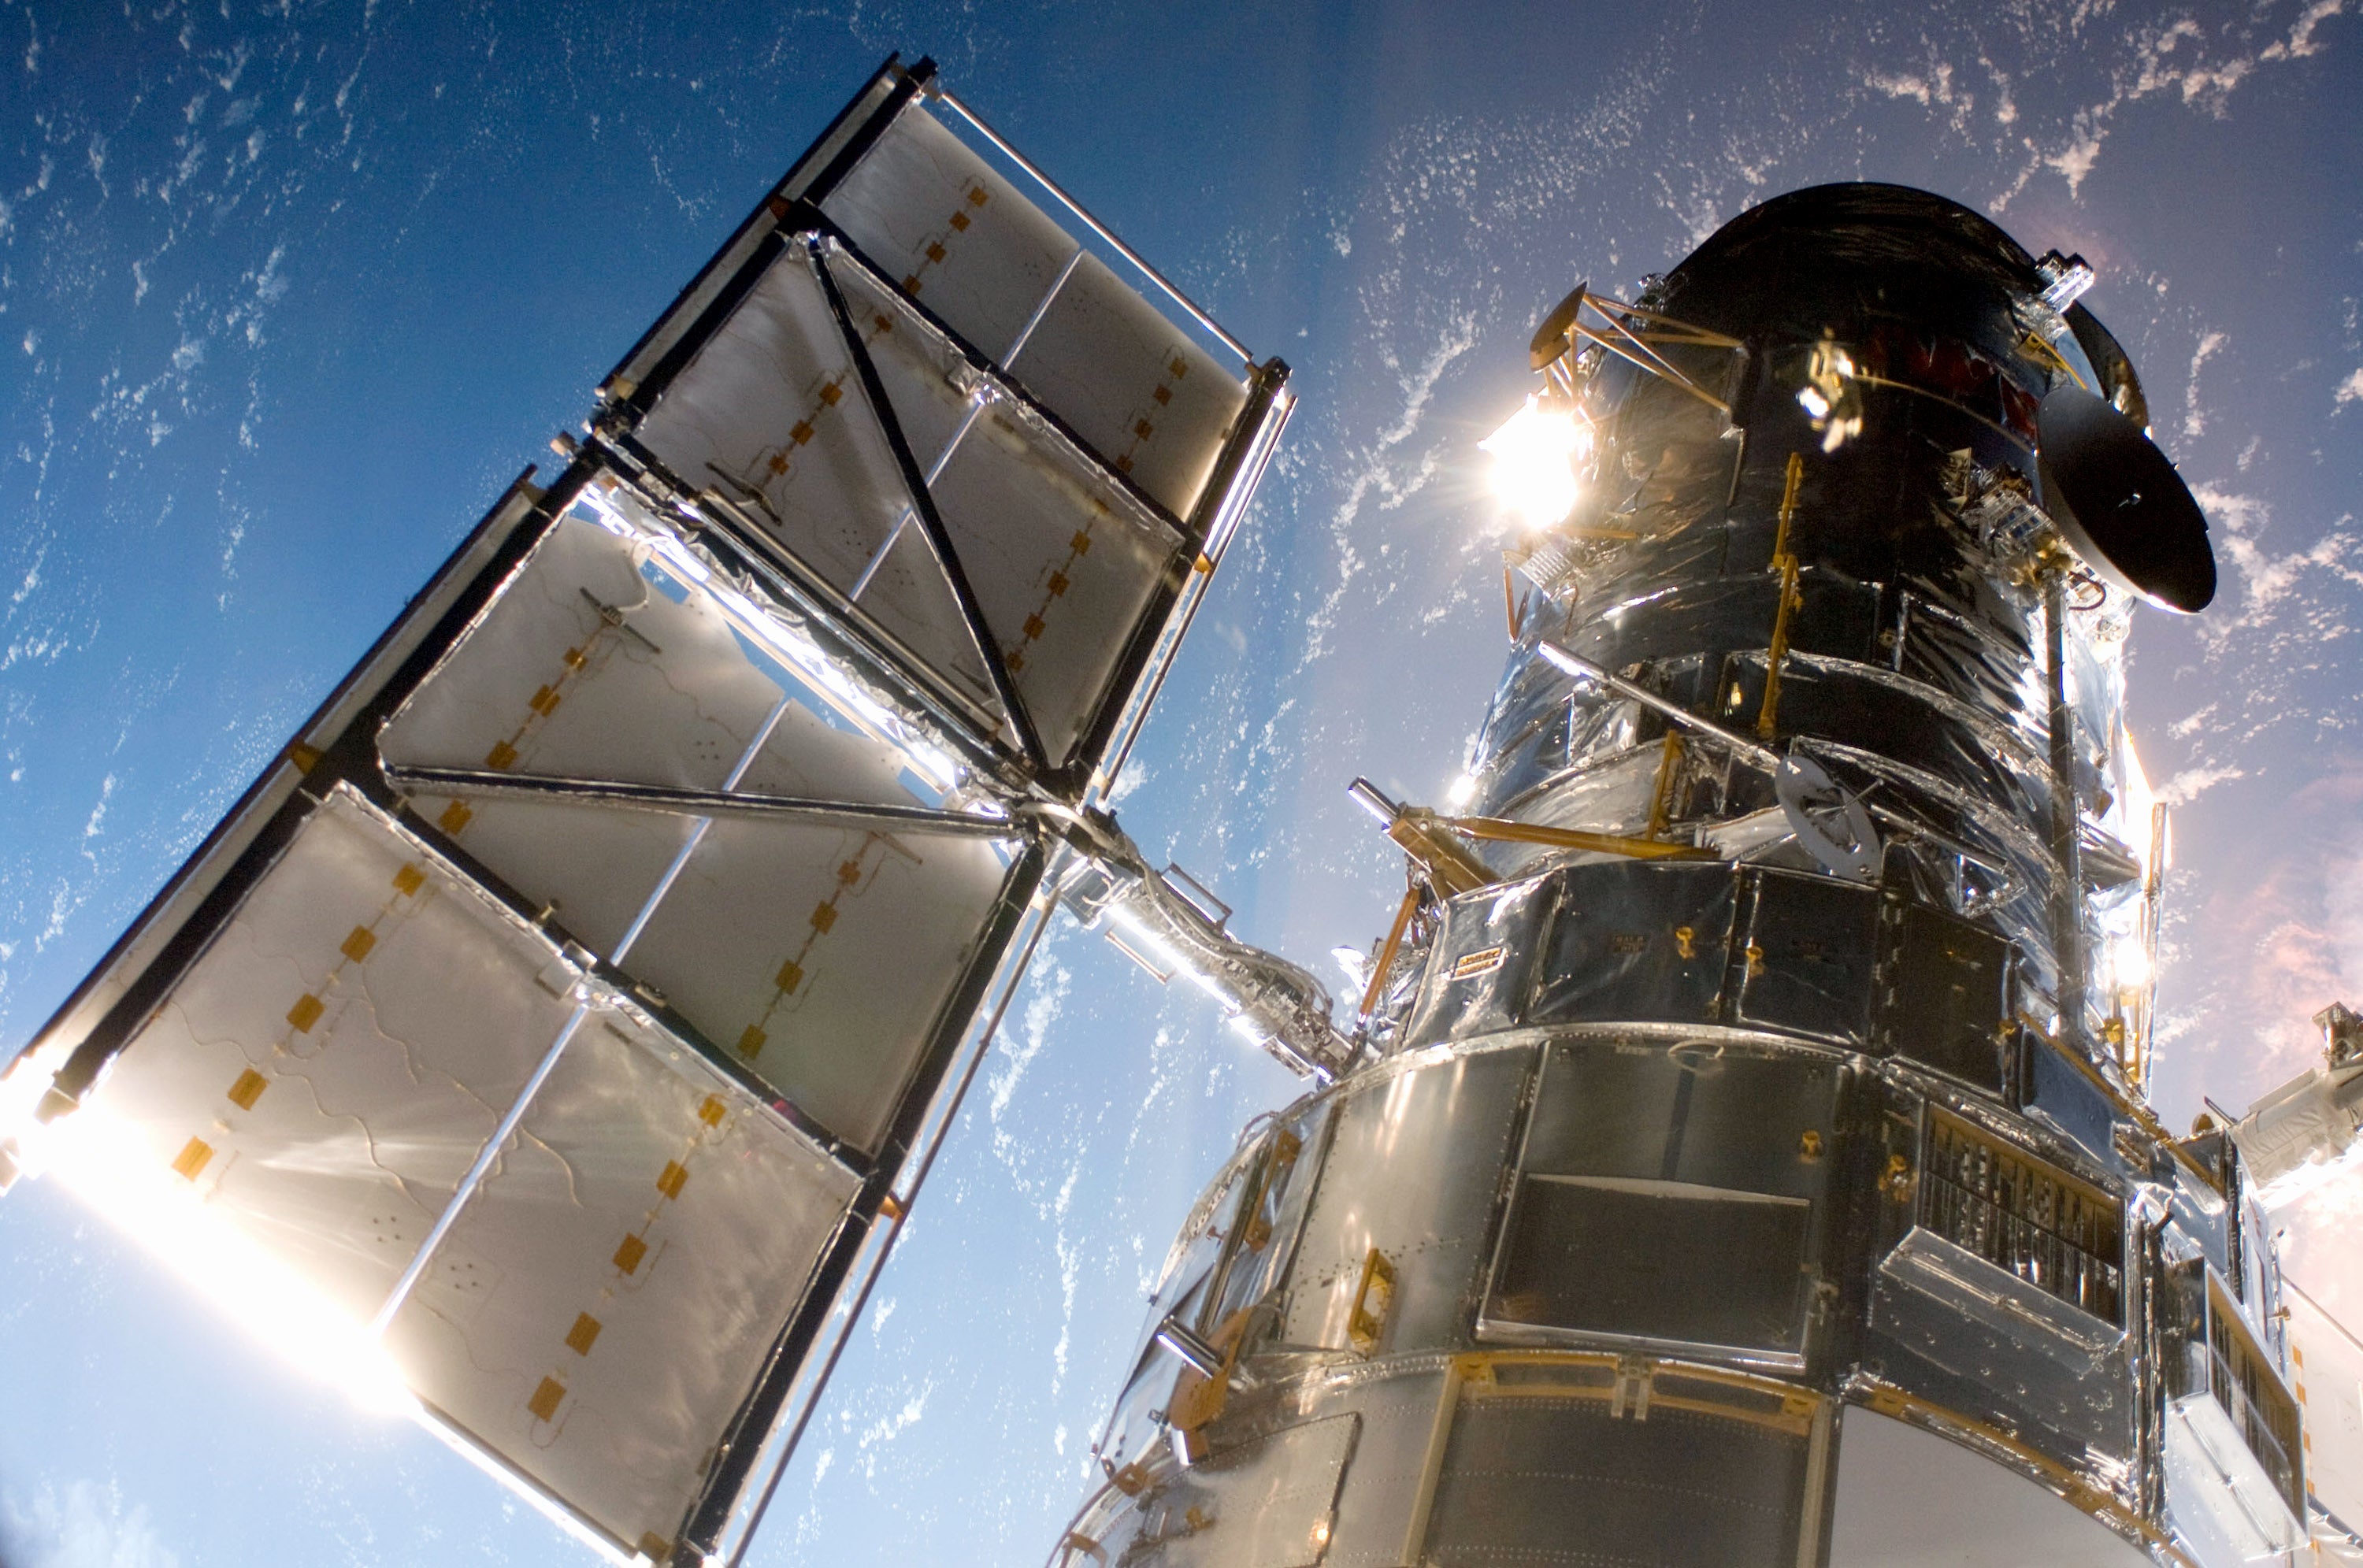 The 25th anniversary of the Hubble's launch is on Friday